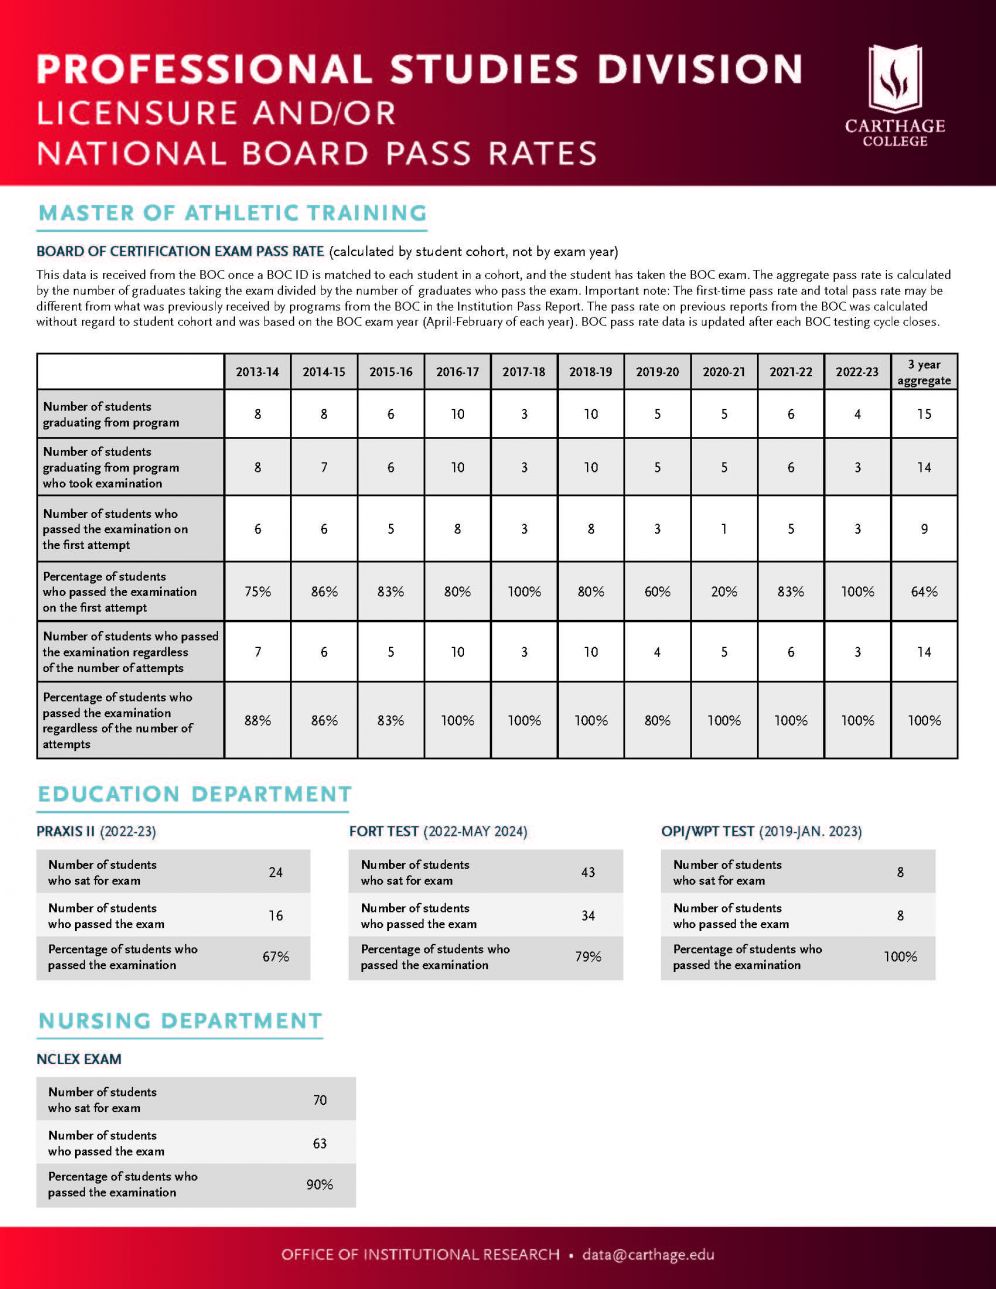 Professional Studies Division Licensure and/or National Board Pass Rates